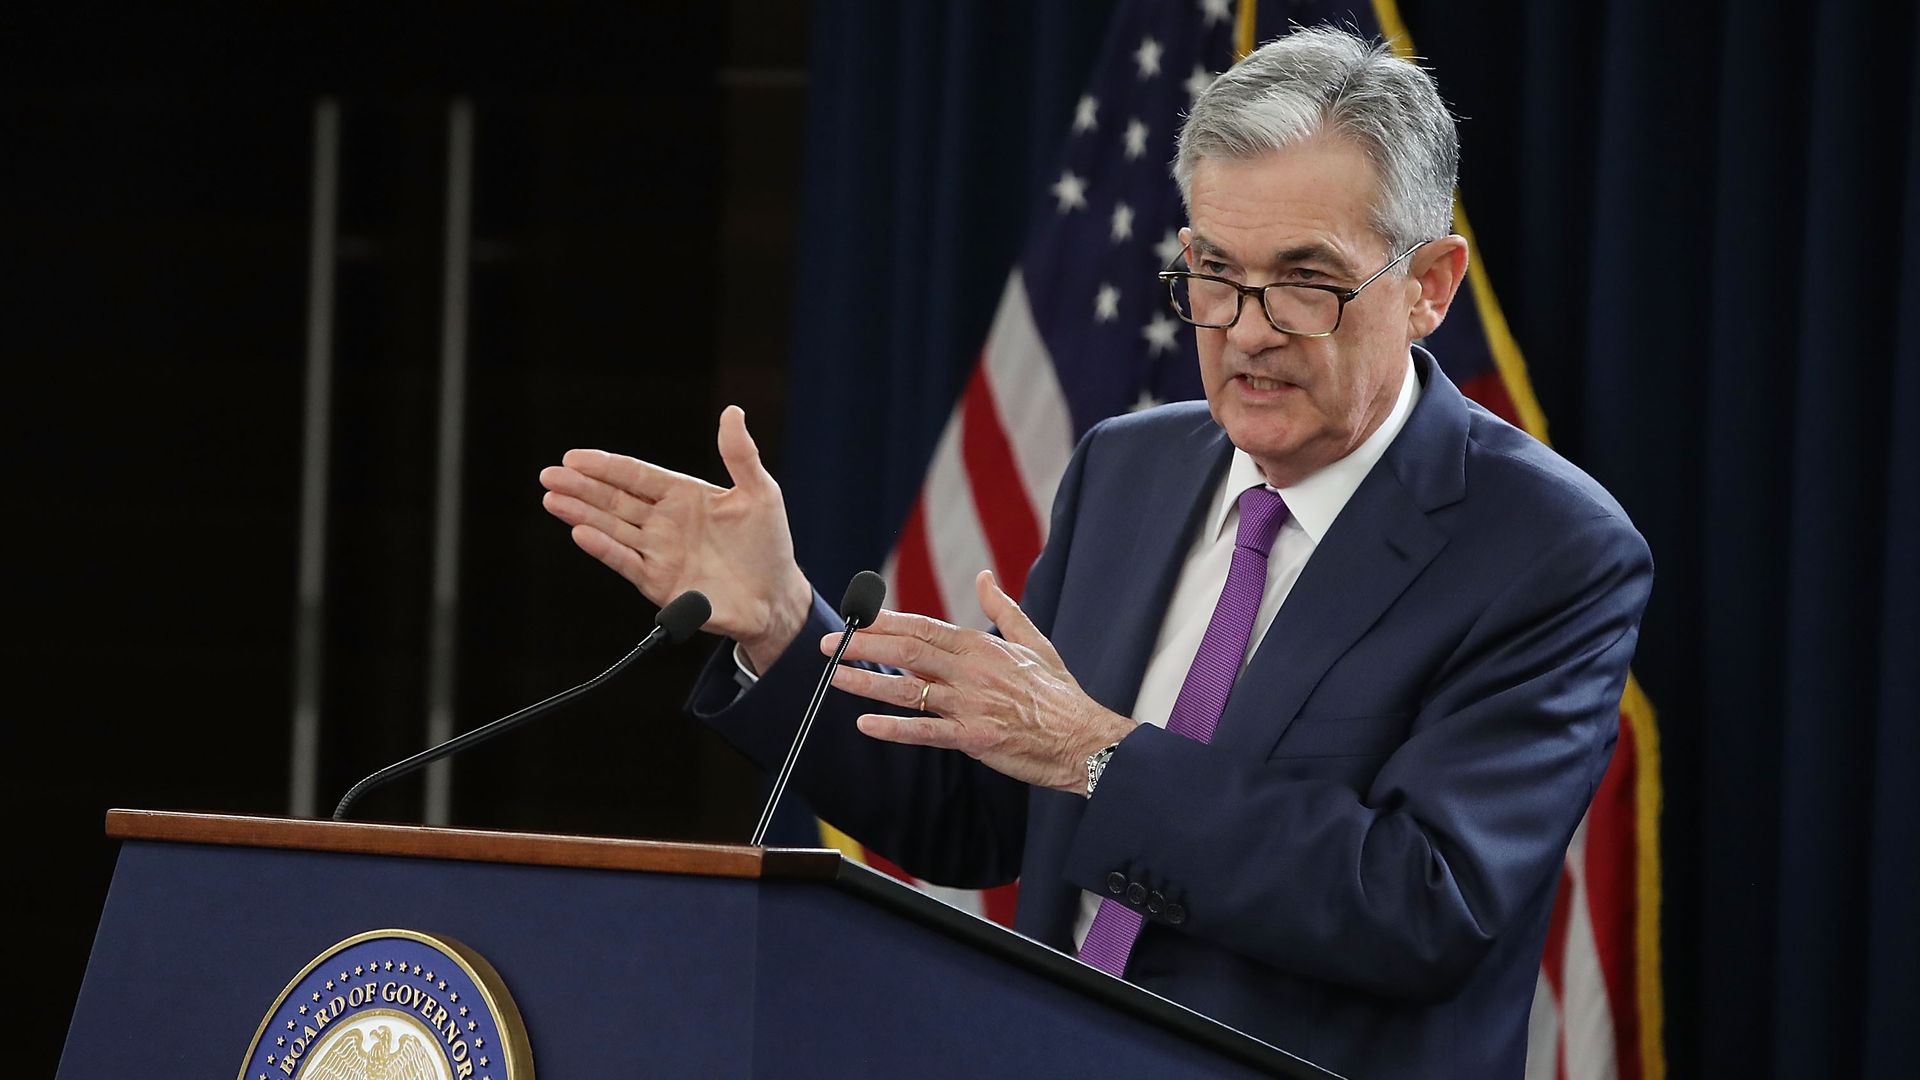 Fed Chair Jerome Powell speaks during a news conference on September 26, 2018.